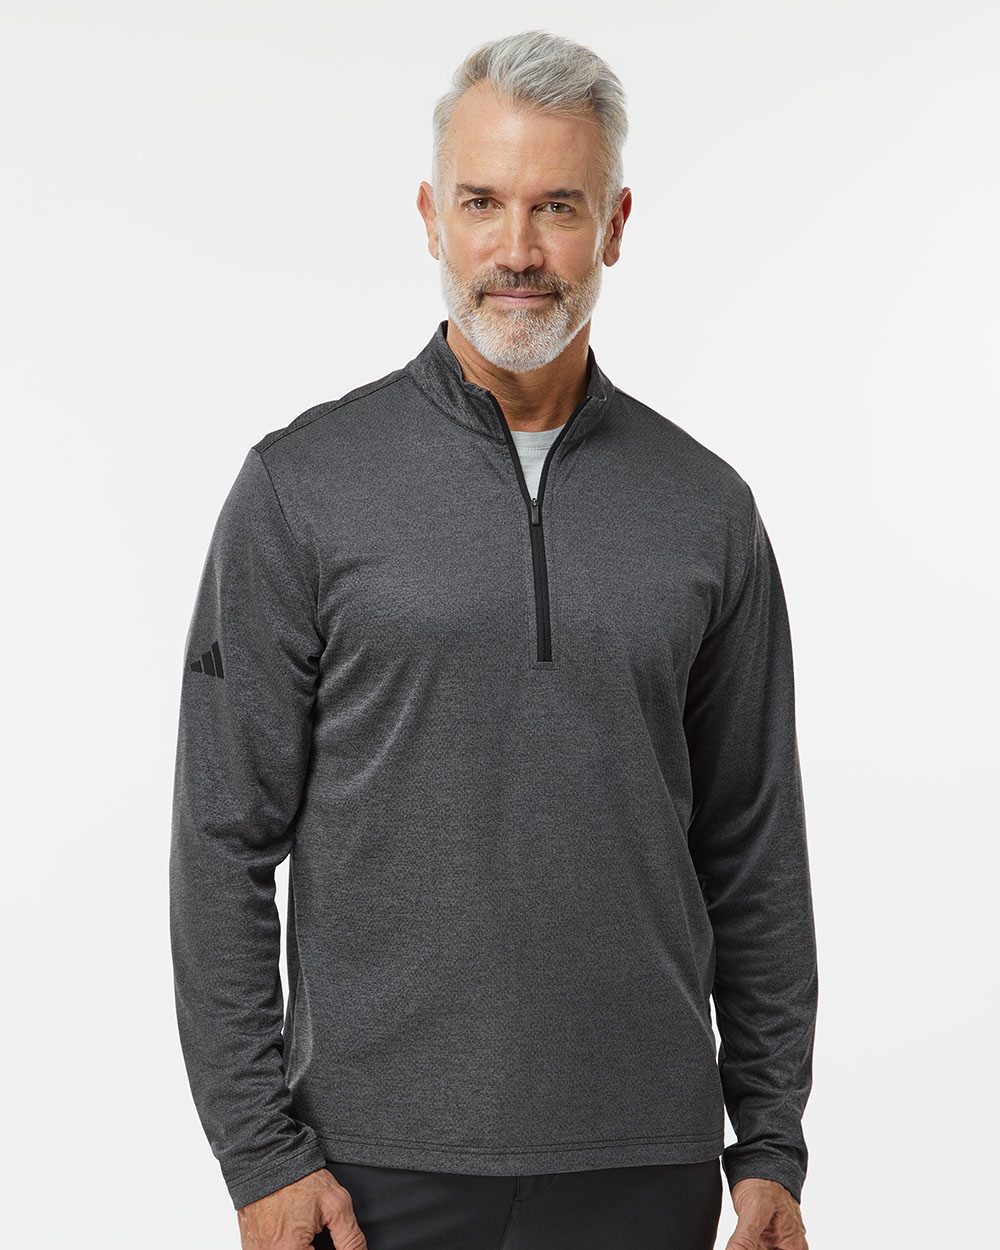 Adidas A593 Space Dyed Quarter-Zip Pullover Adidas A593 Space Dyed Quarter-Zip Pullover